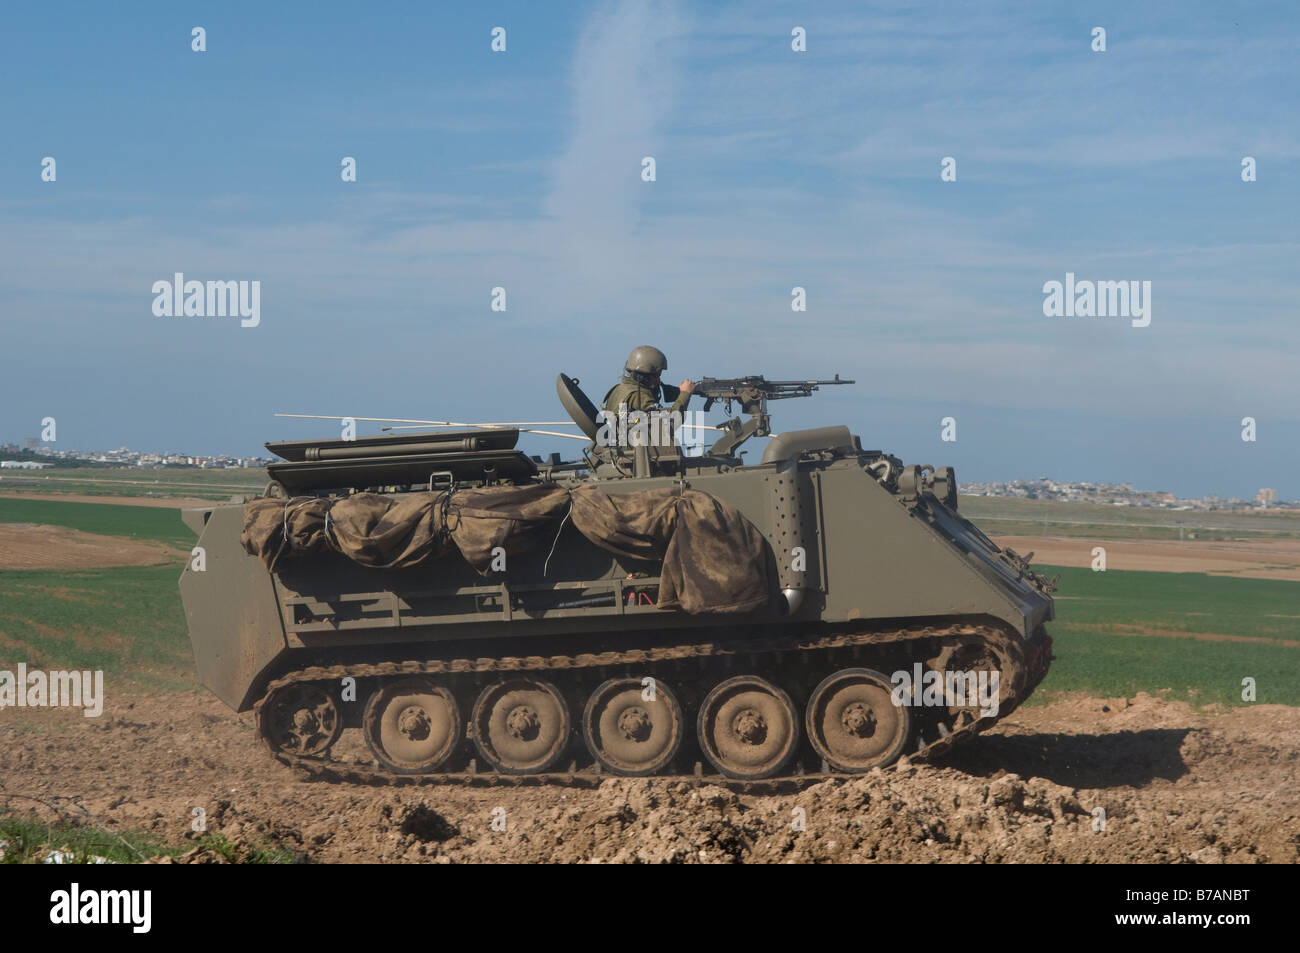 An IDF armored personnel carrier maneuvering at the Israel-Gaza border, Israel Stock Photo